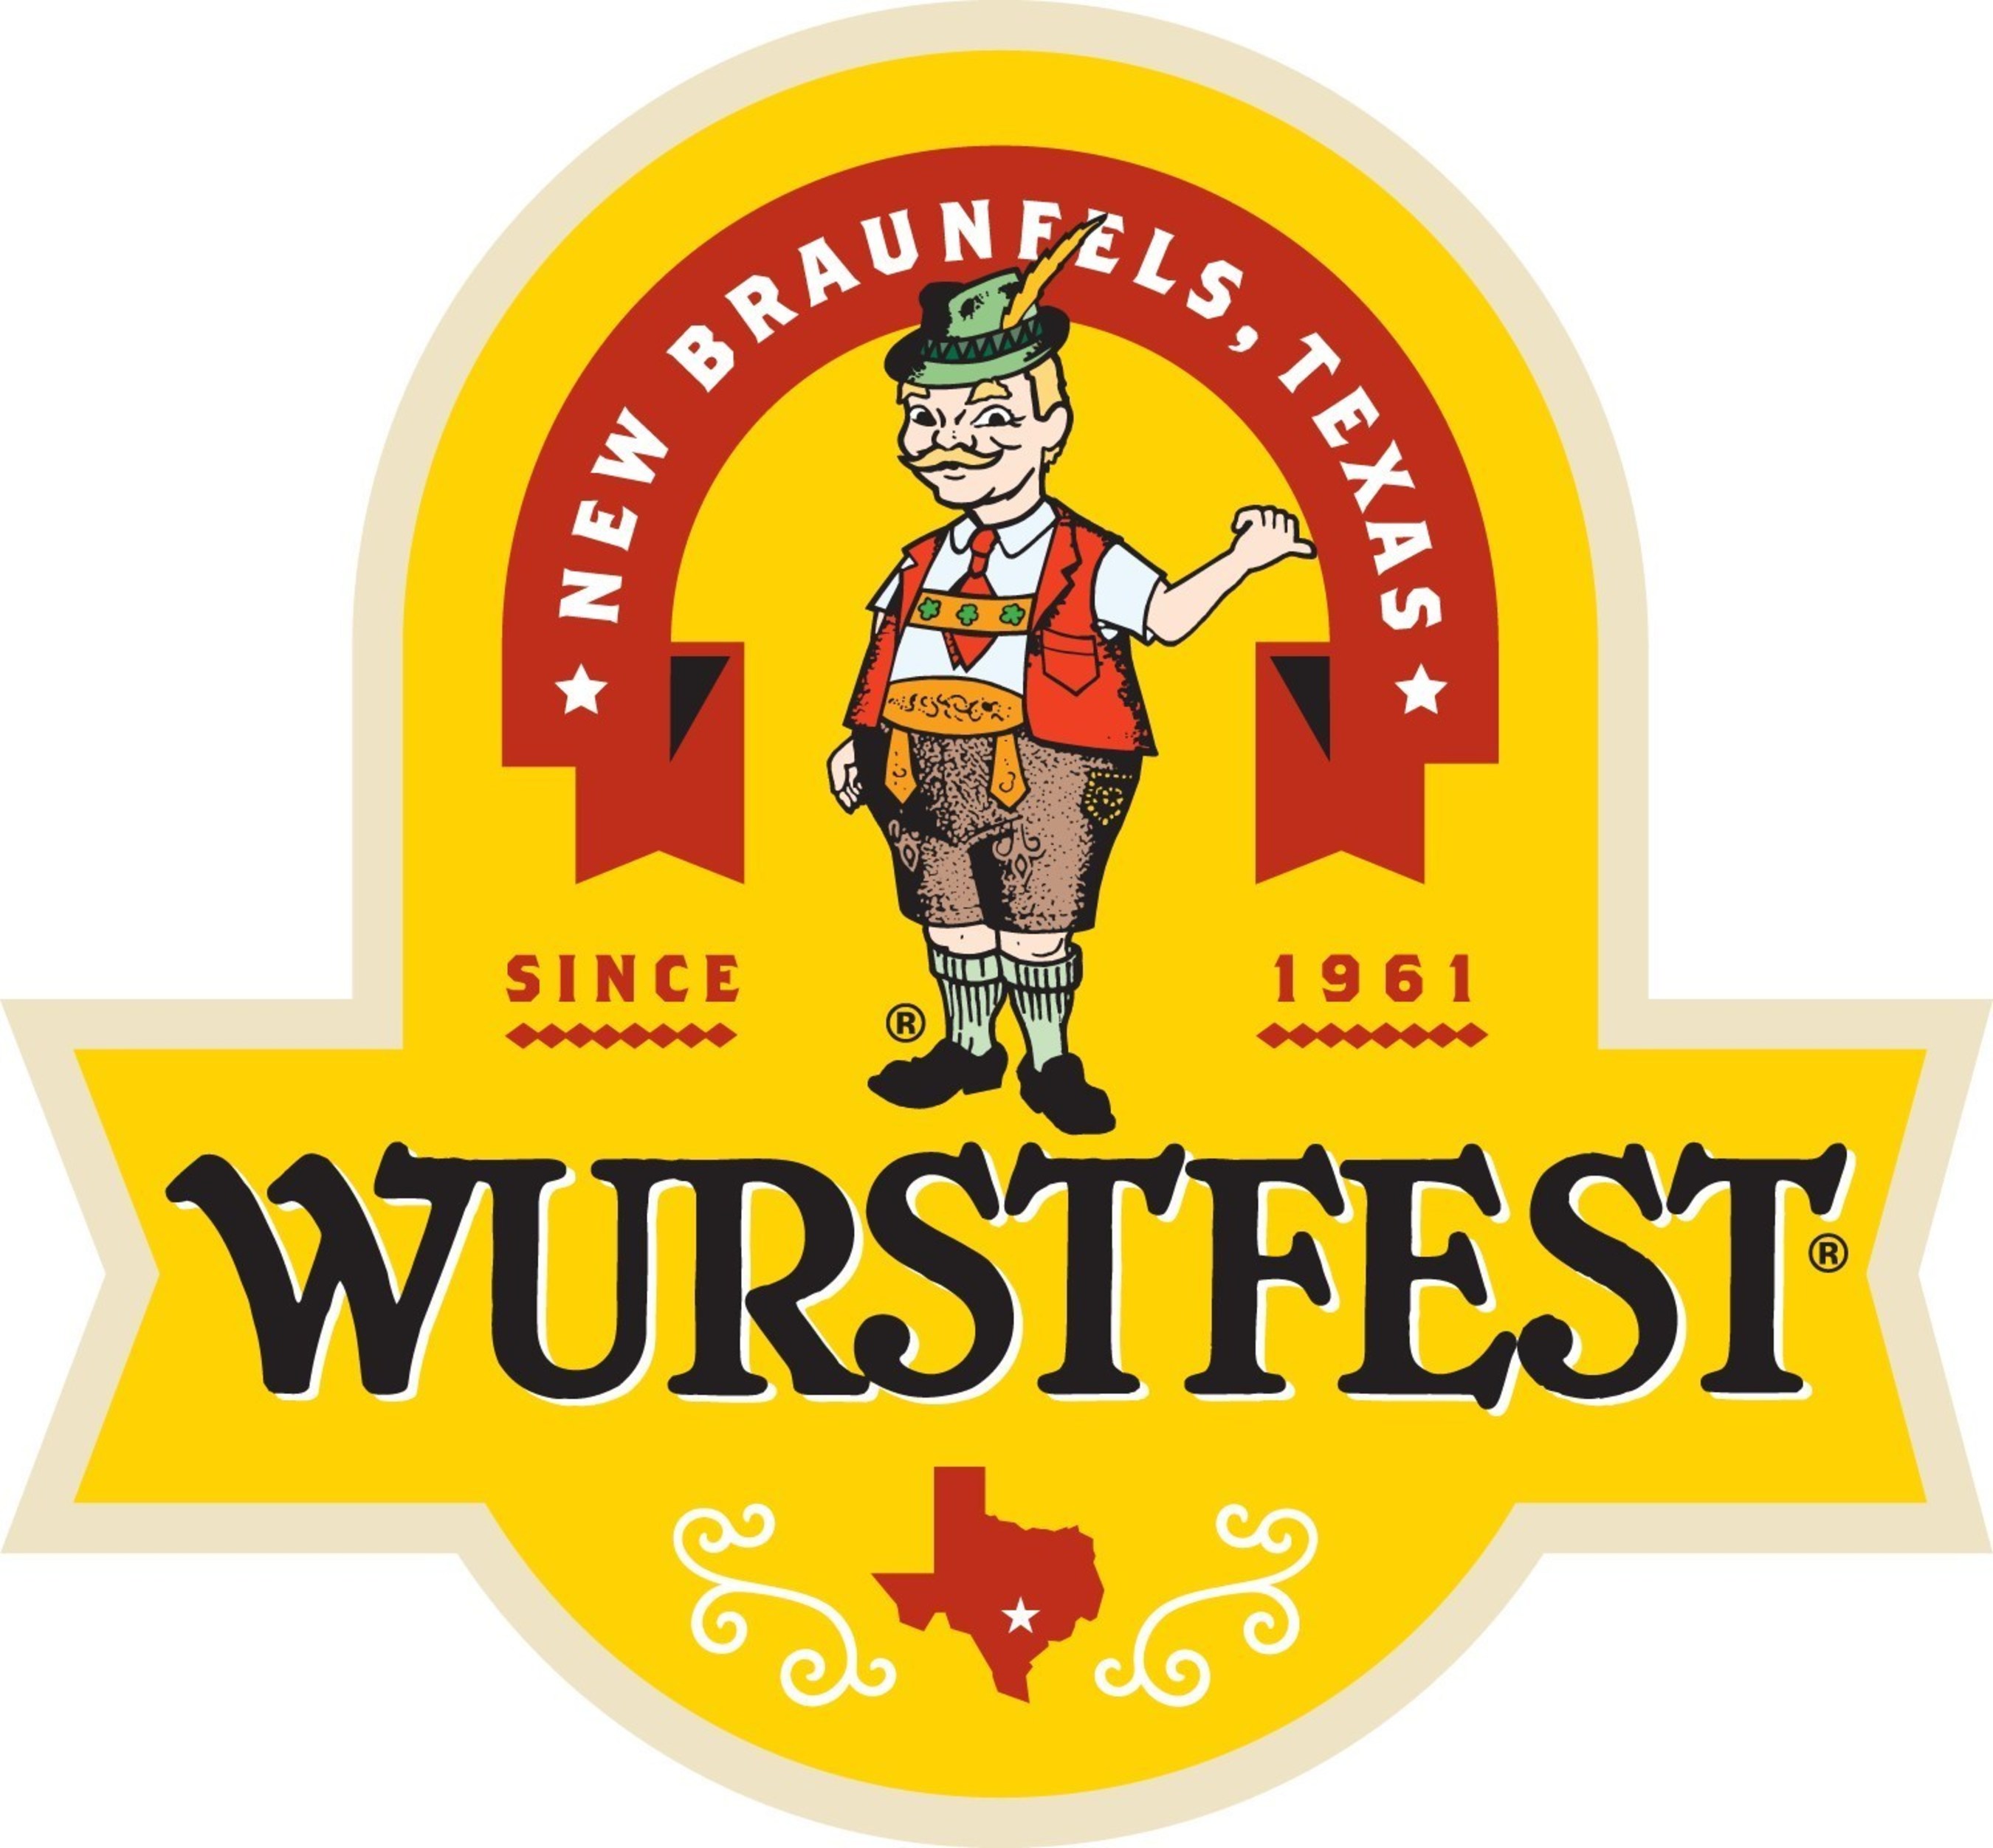 Wurstfest, located in New Braunfels, Texas, is a unique annual celebration rich in German culture, focused on fellowship through the enjoyment of good food, music, and dancing with family and friends, One of the largest German cultural festivals in the U.S., Wurstfest started in 1961 as a way to celebrate local sausage makers, some of whom still provide thousands of links of sausage and other smoked meats for the event.